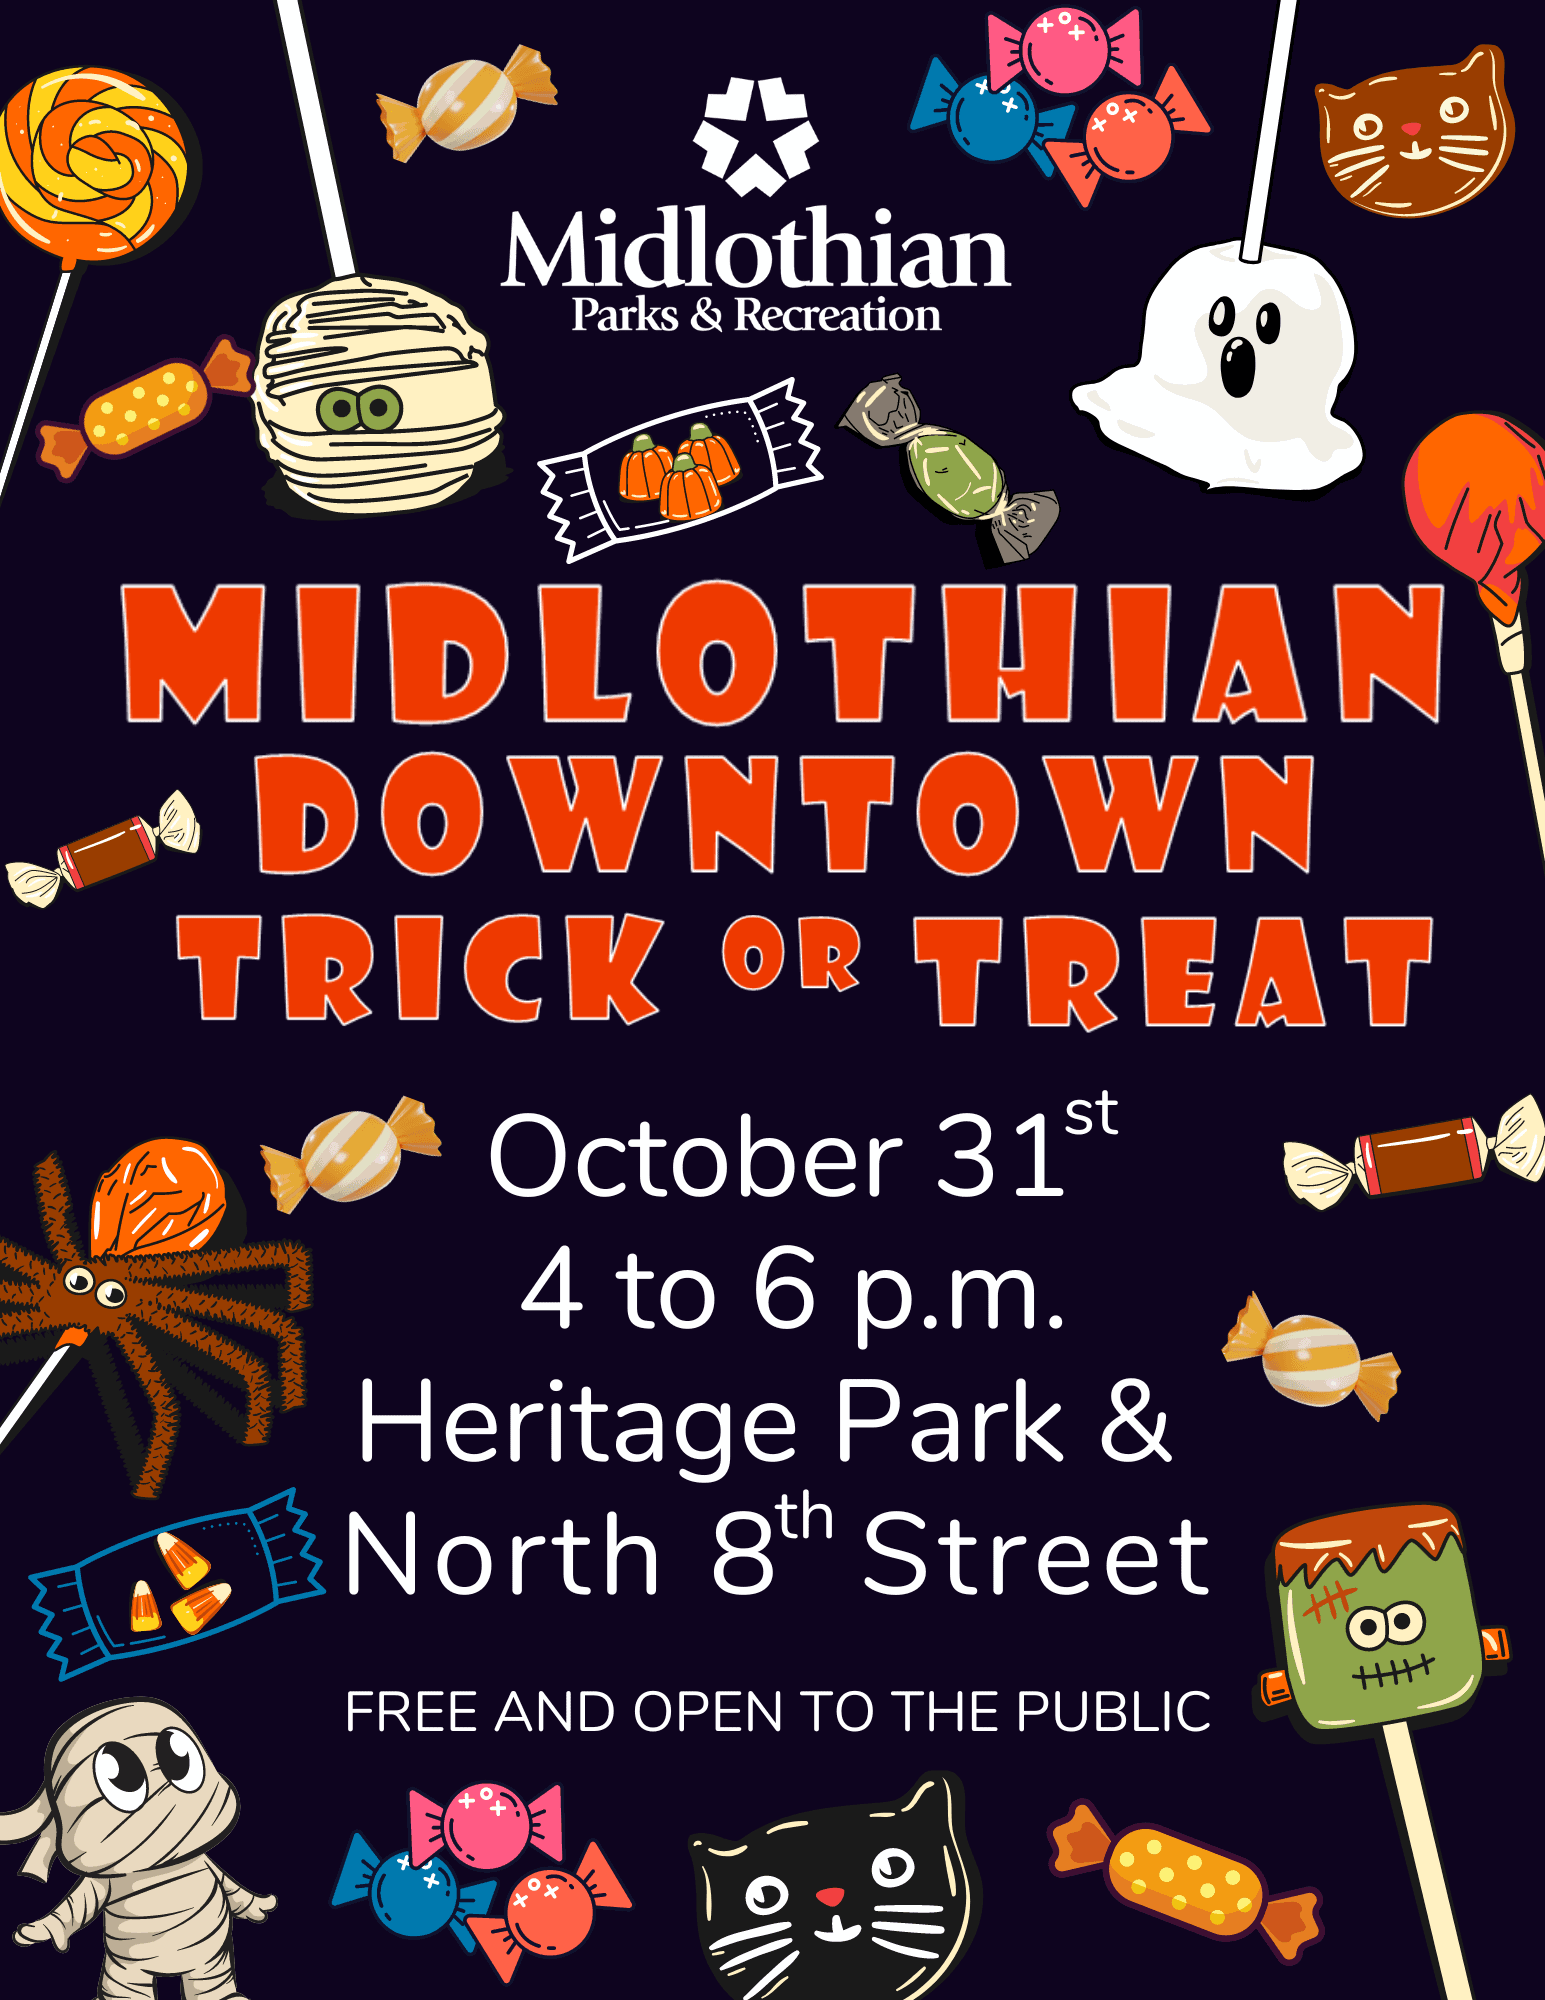 Midlo downtown trick or treat flyer